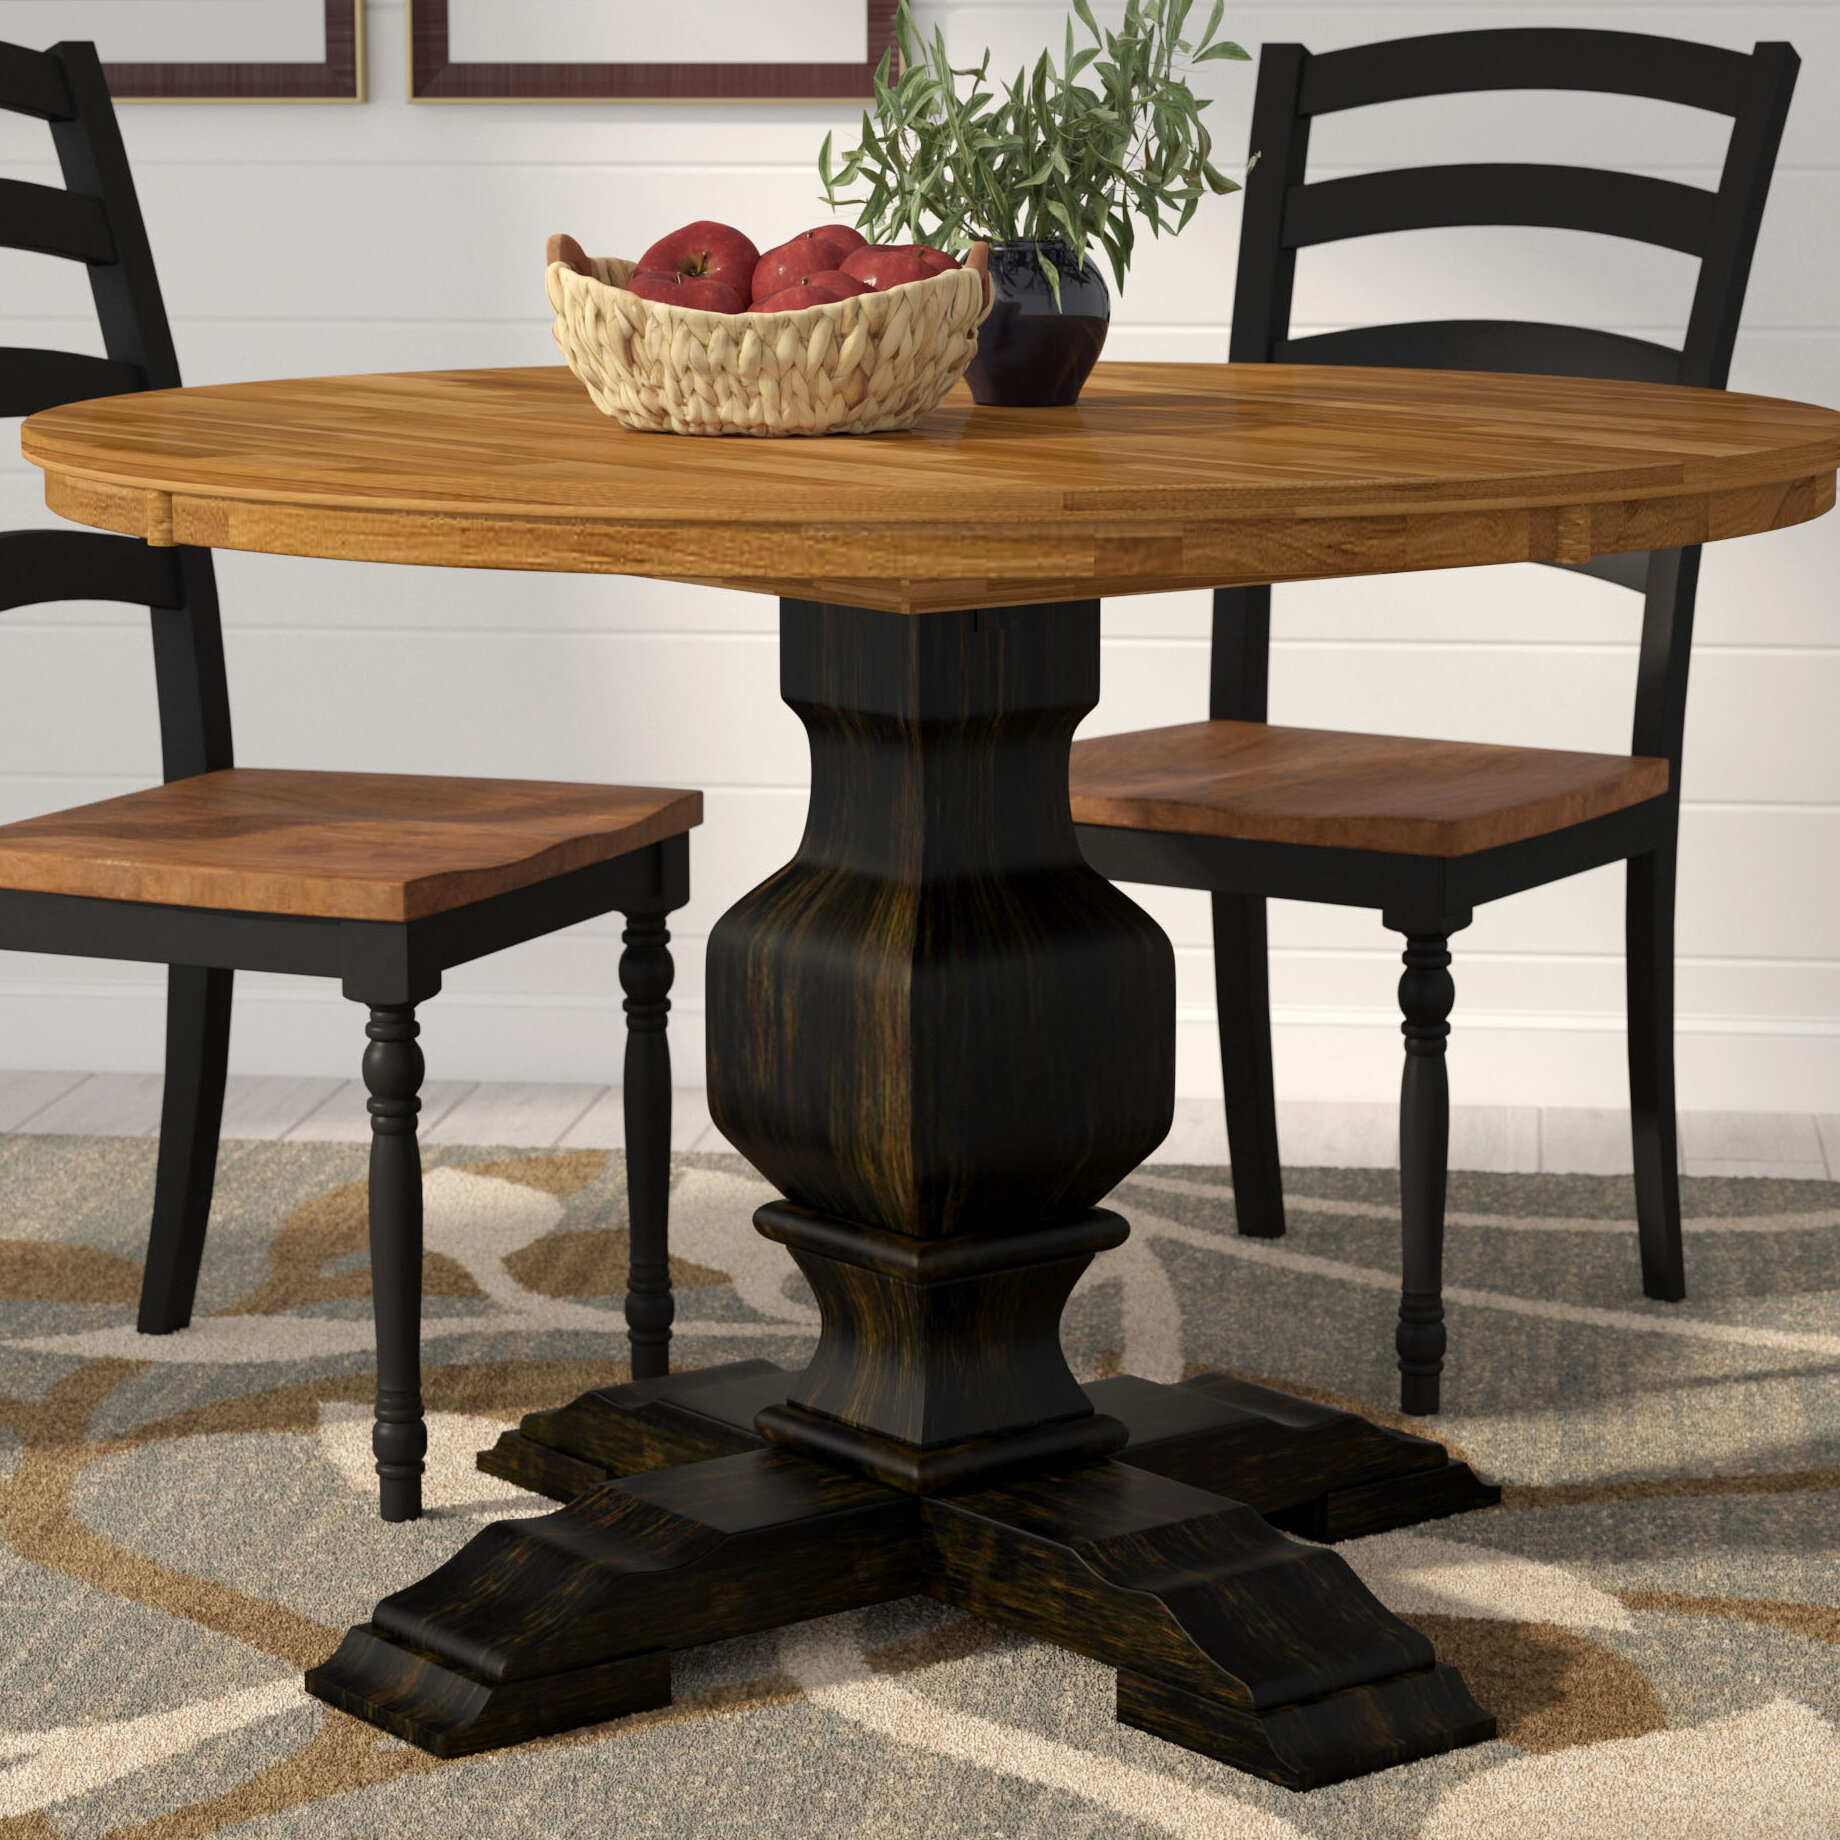 48 Inch Round Dining Table You Ll Love, 48 Inch Round Wood Dining Table